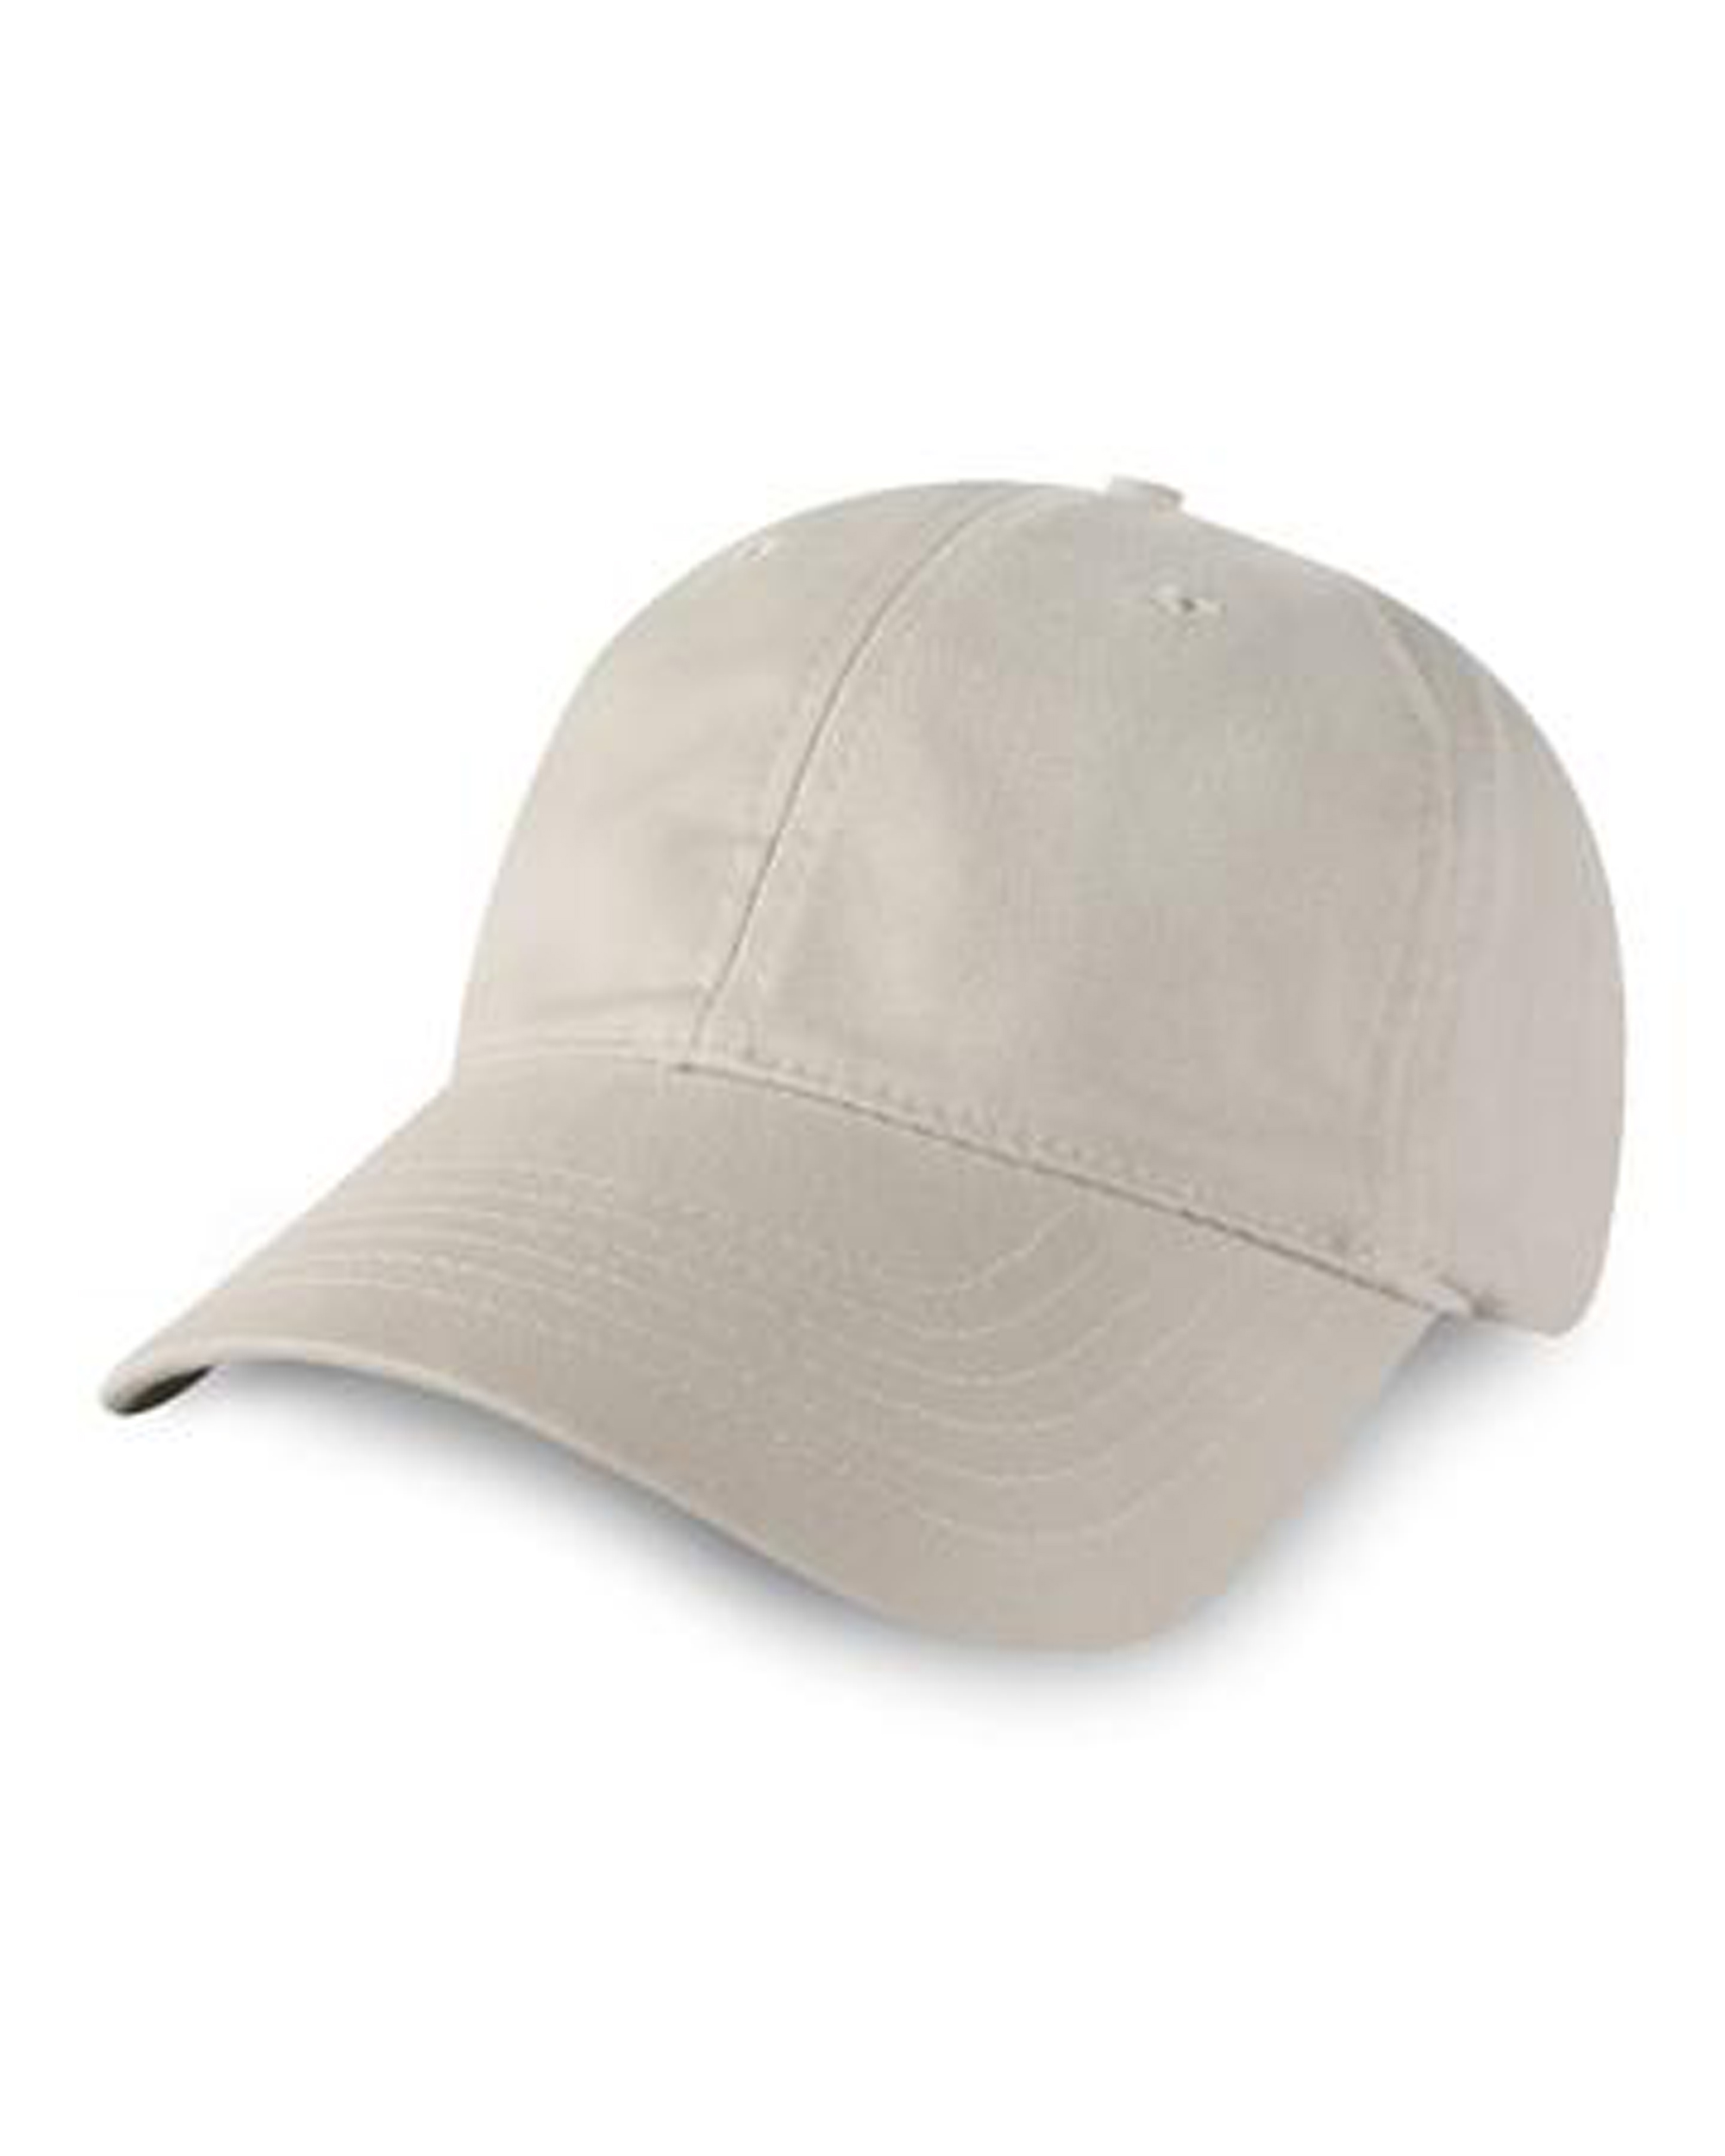 EastWest Embroidery 8100 Washed Brushed Gap Cap